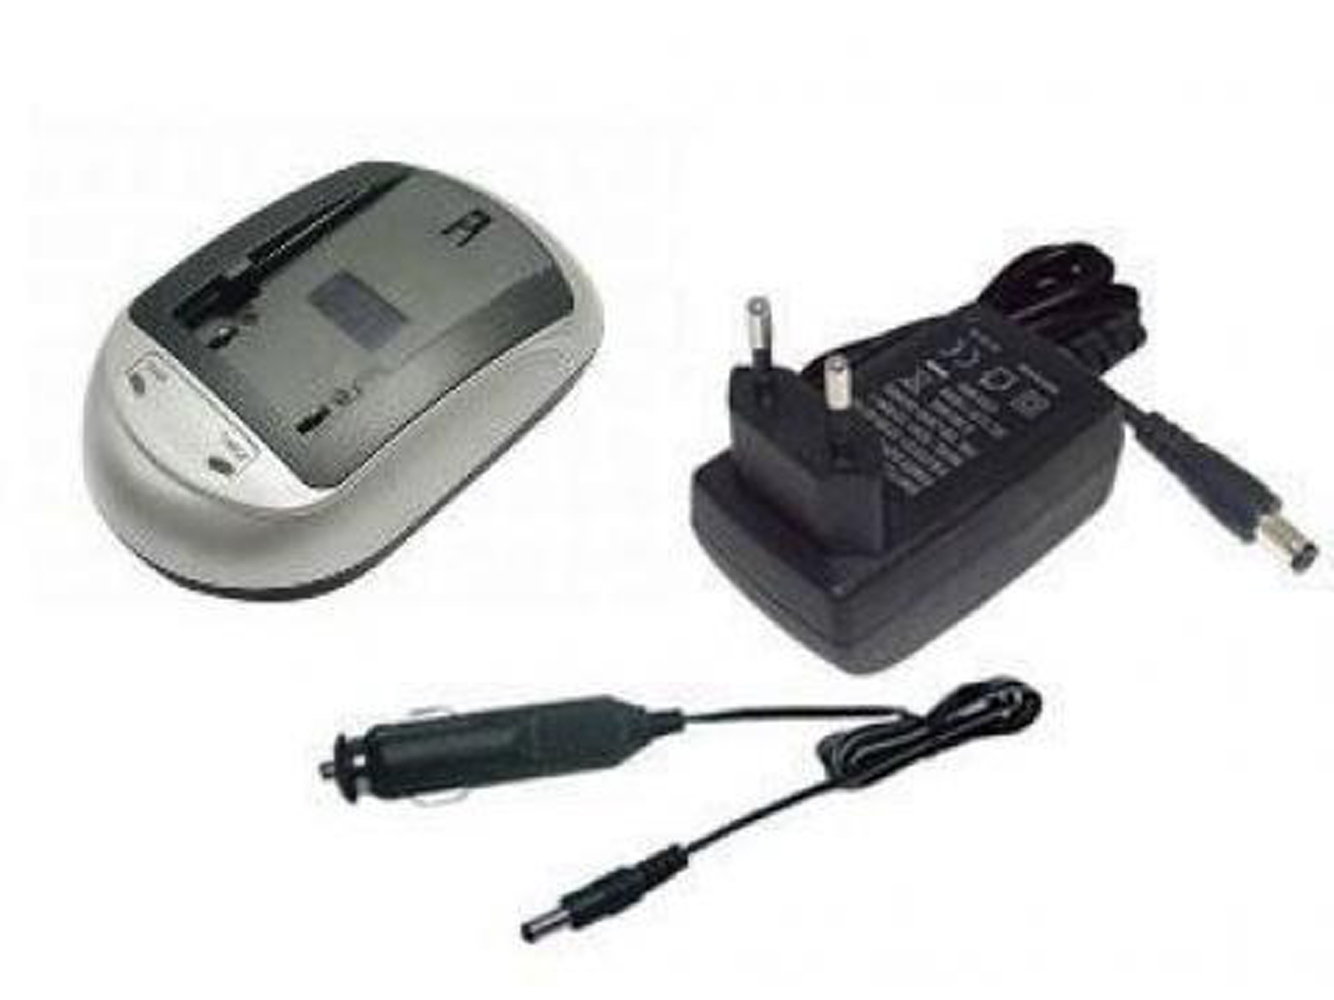 Samsung Sb-p120abk, Sb-p120asl Battery Chargers For Sc-mm10, Sc-mm10bl replacement